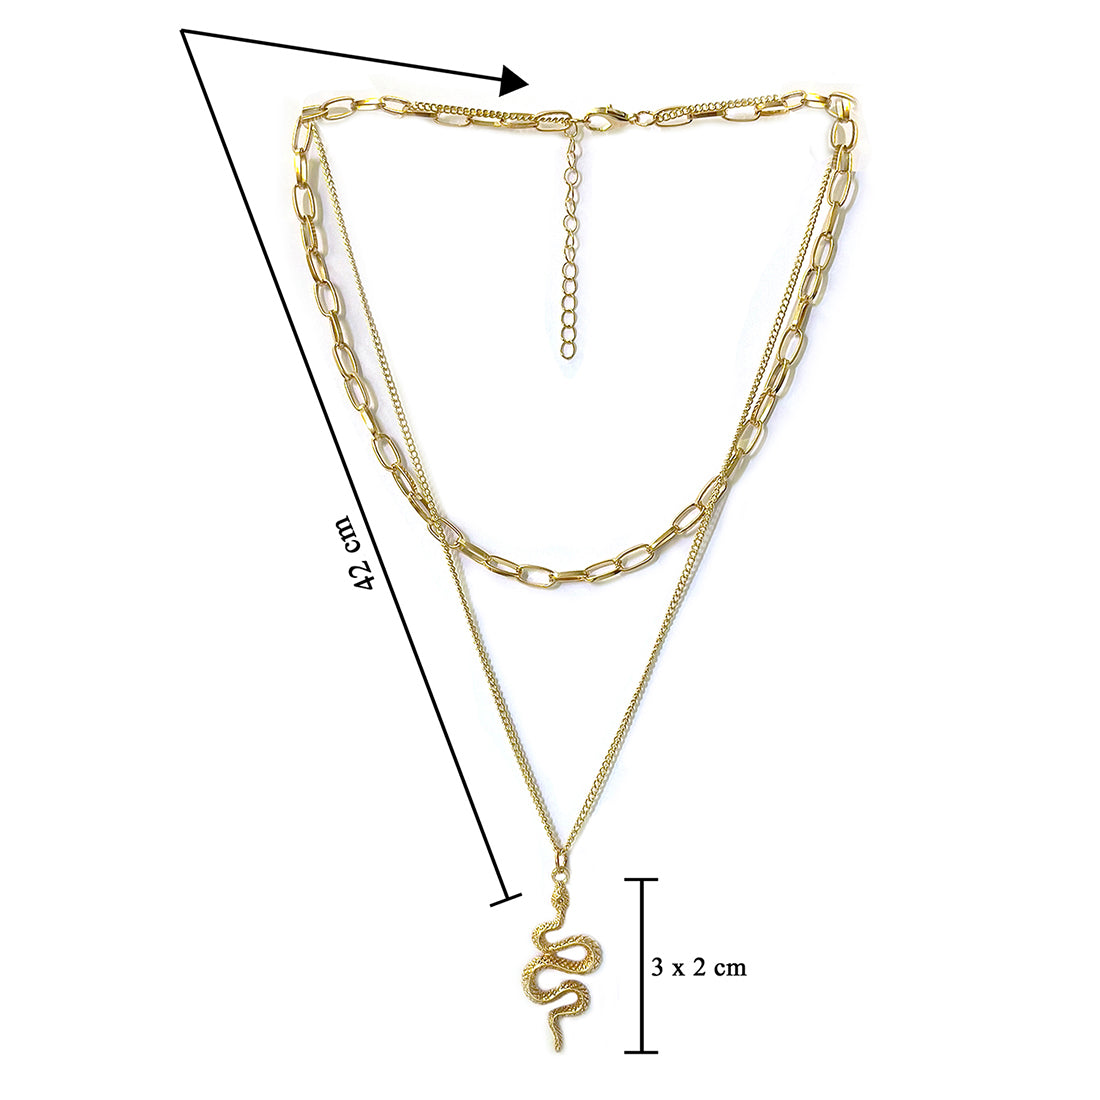 Chunky Chain-Link Snake Pendant Gold-Toned Multi-Layered Necklace